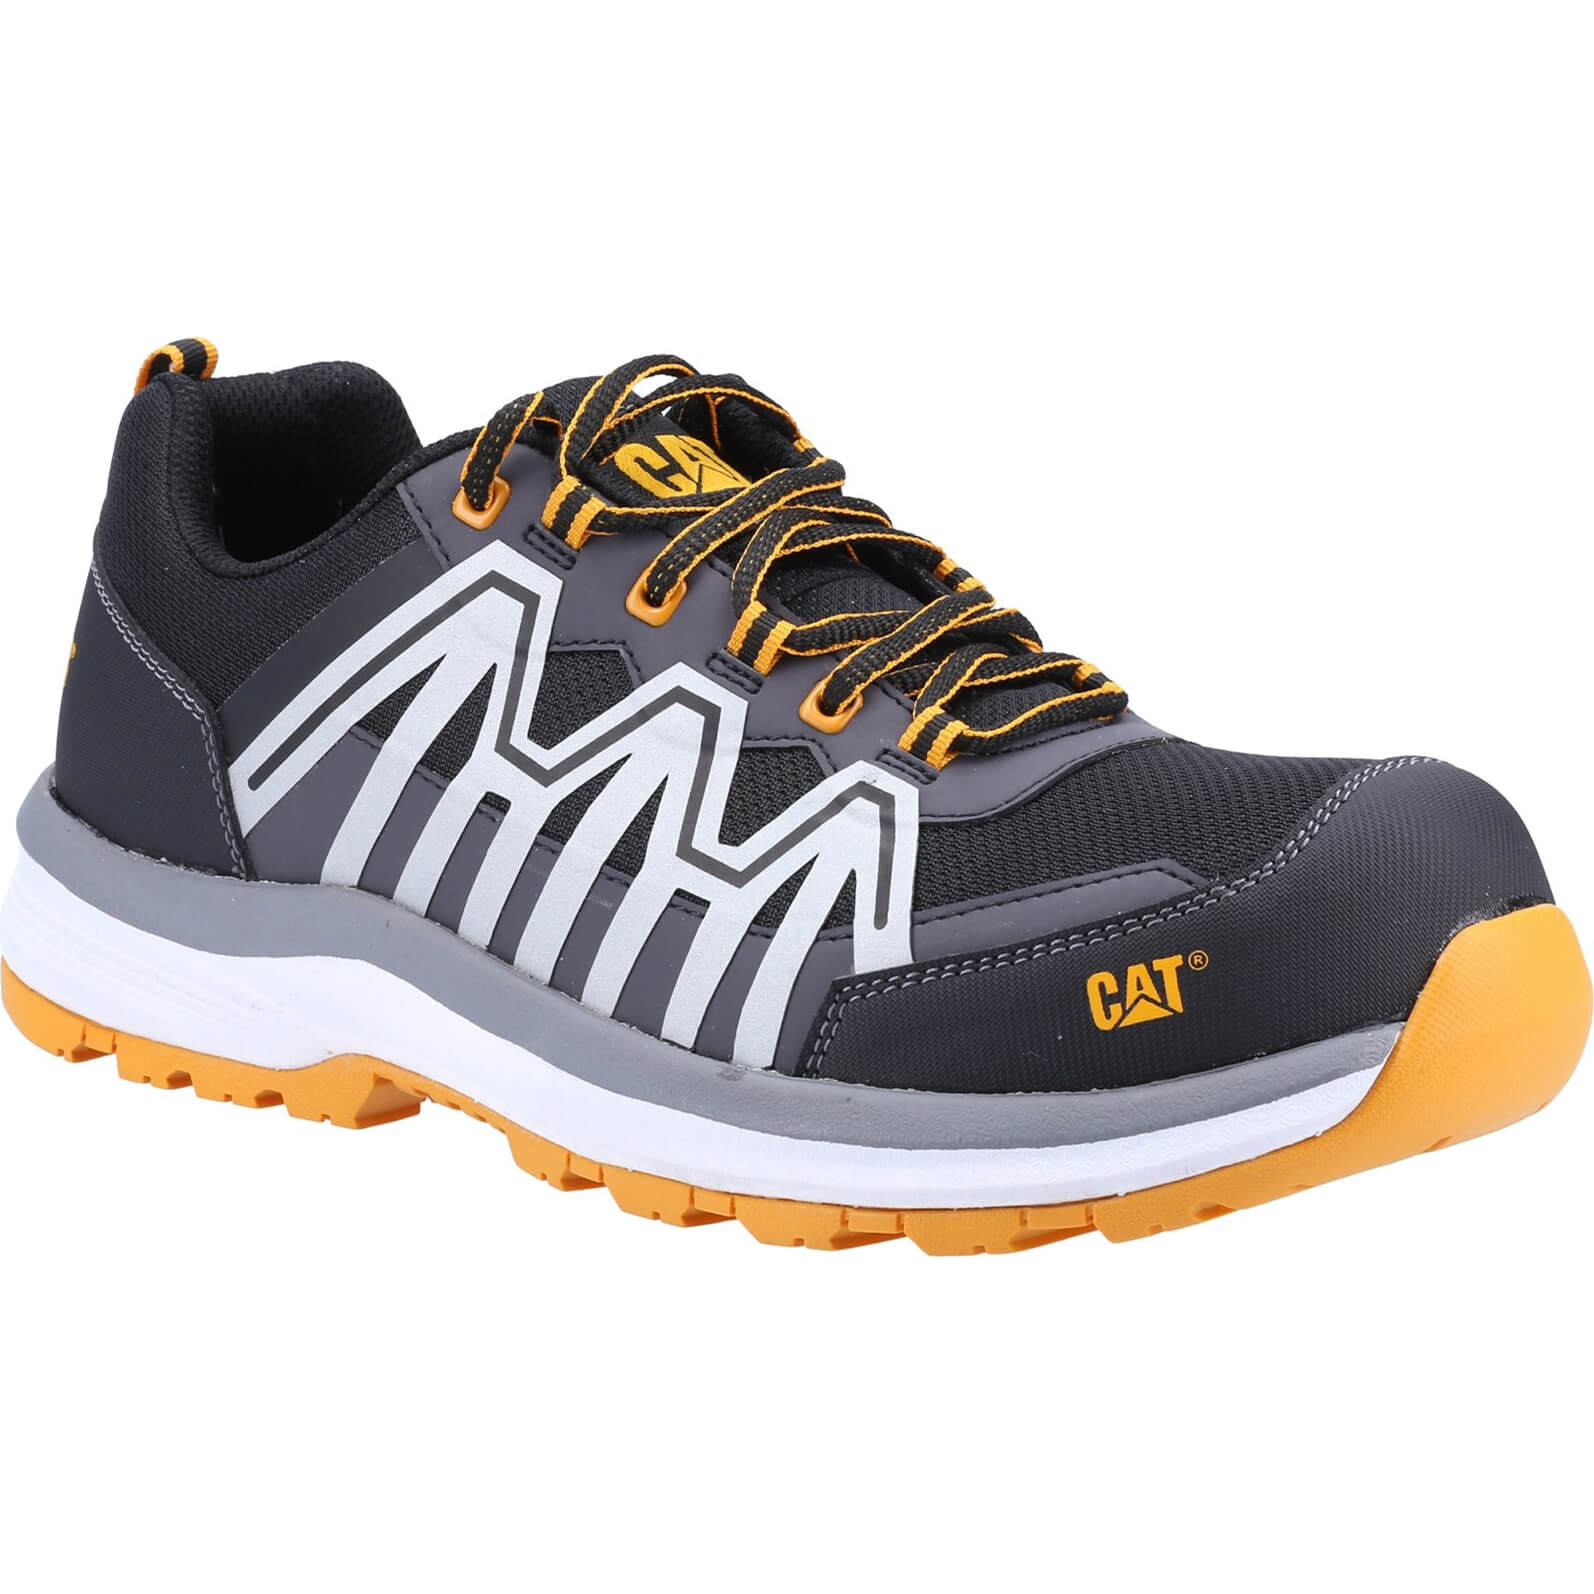 Image of Caterpillar Mens Charge S3 Safety Trainer Orange Size 11